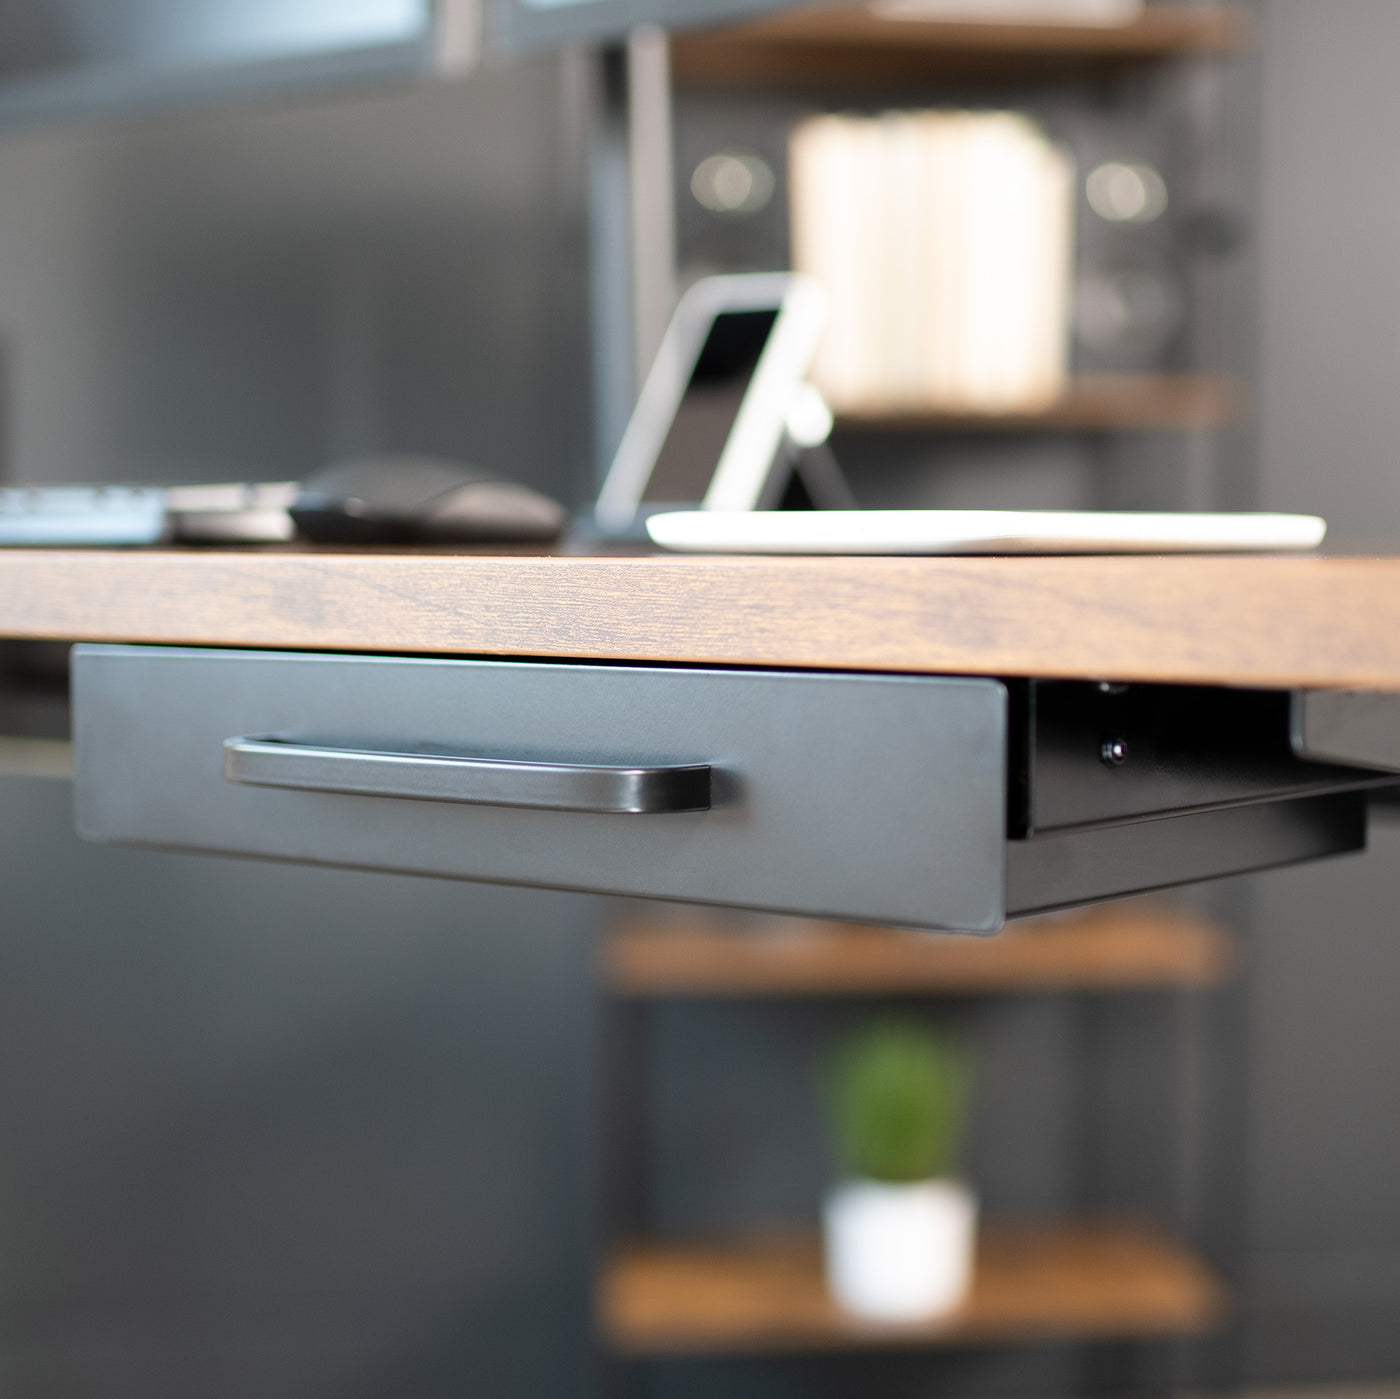 This 13.3” (14.8” including side brackets)  x 8.7” x 2.5” pull-out drawer mounts to the underside of your desk (at least 0.75” thick) and provides extra storage space for decluttering your area in style. Designed to fit both standing desks and standard fixed-height workstations.